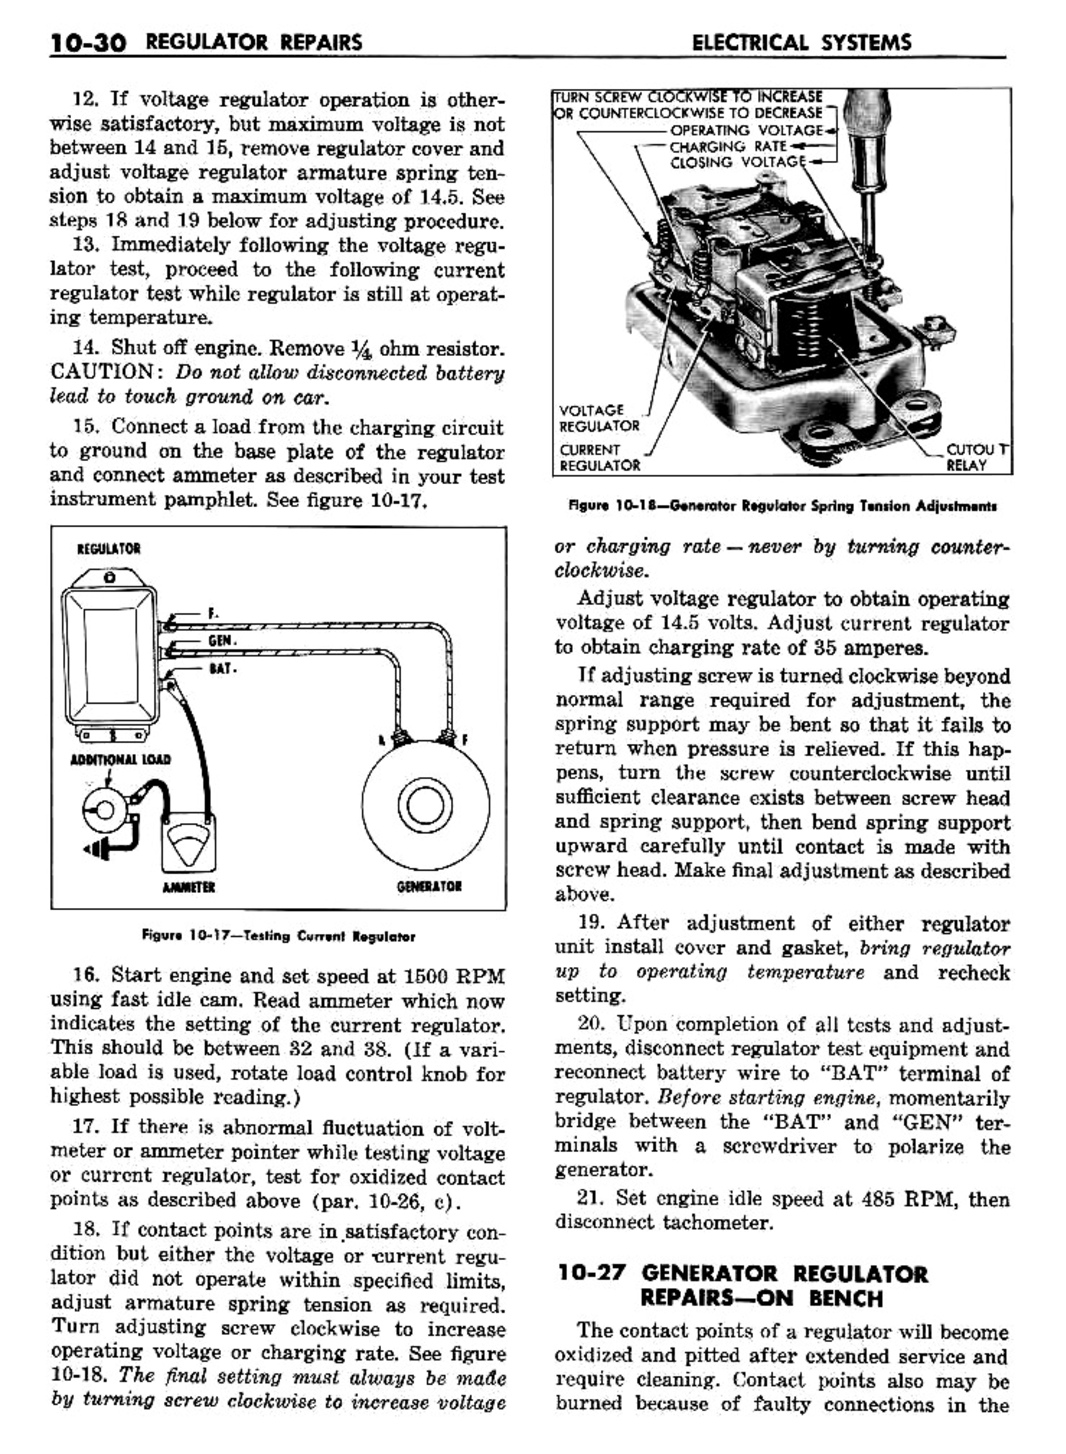 n_11 1957 Buick Shop Manual - Electrical Systems-030-030.jpg